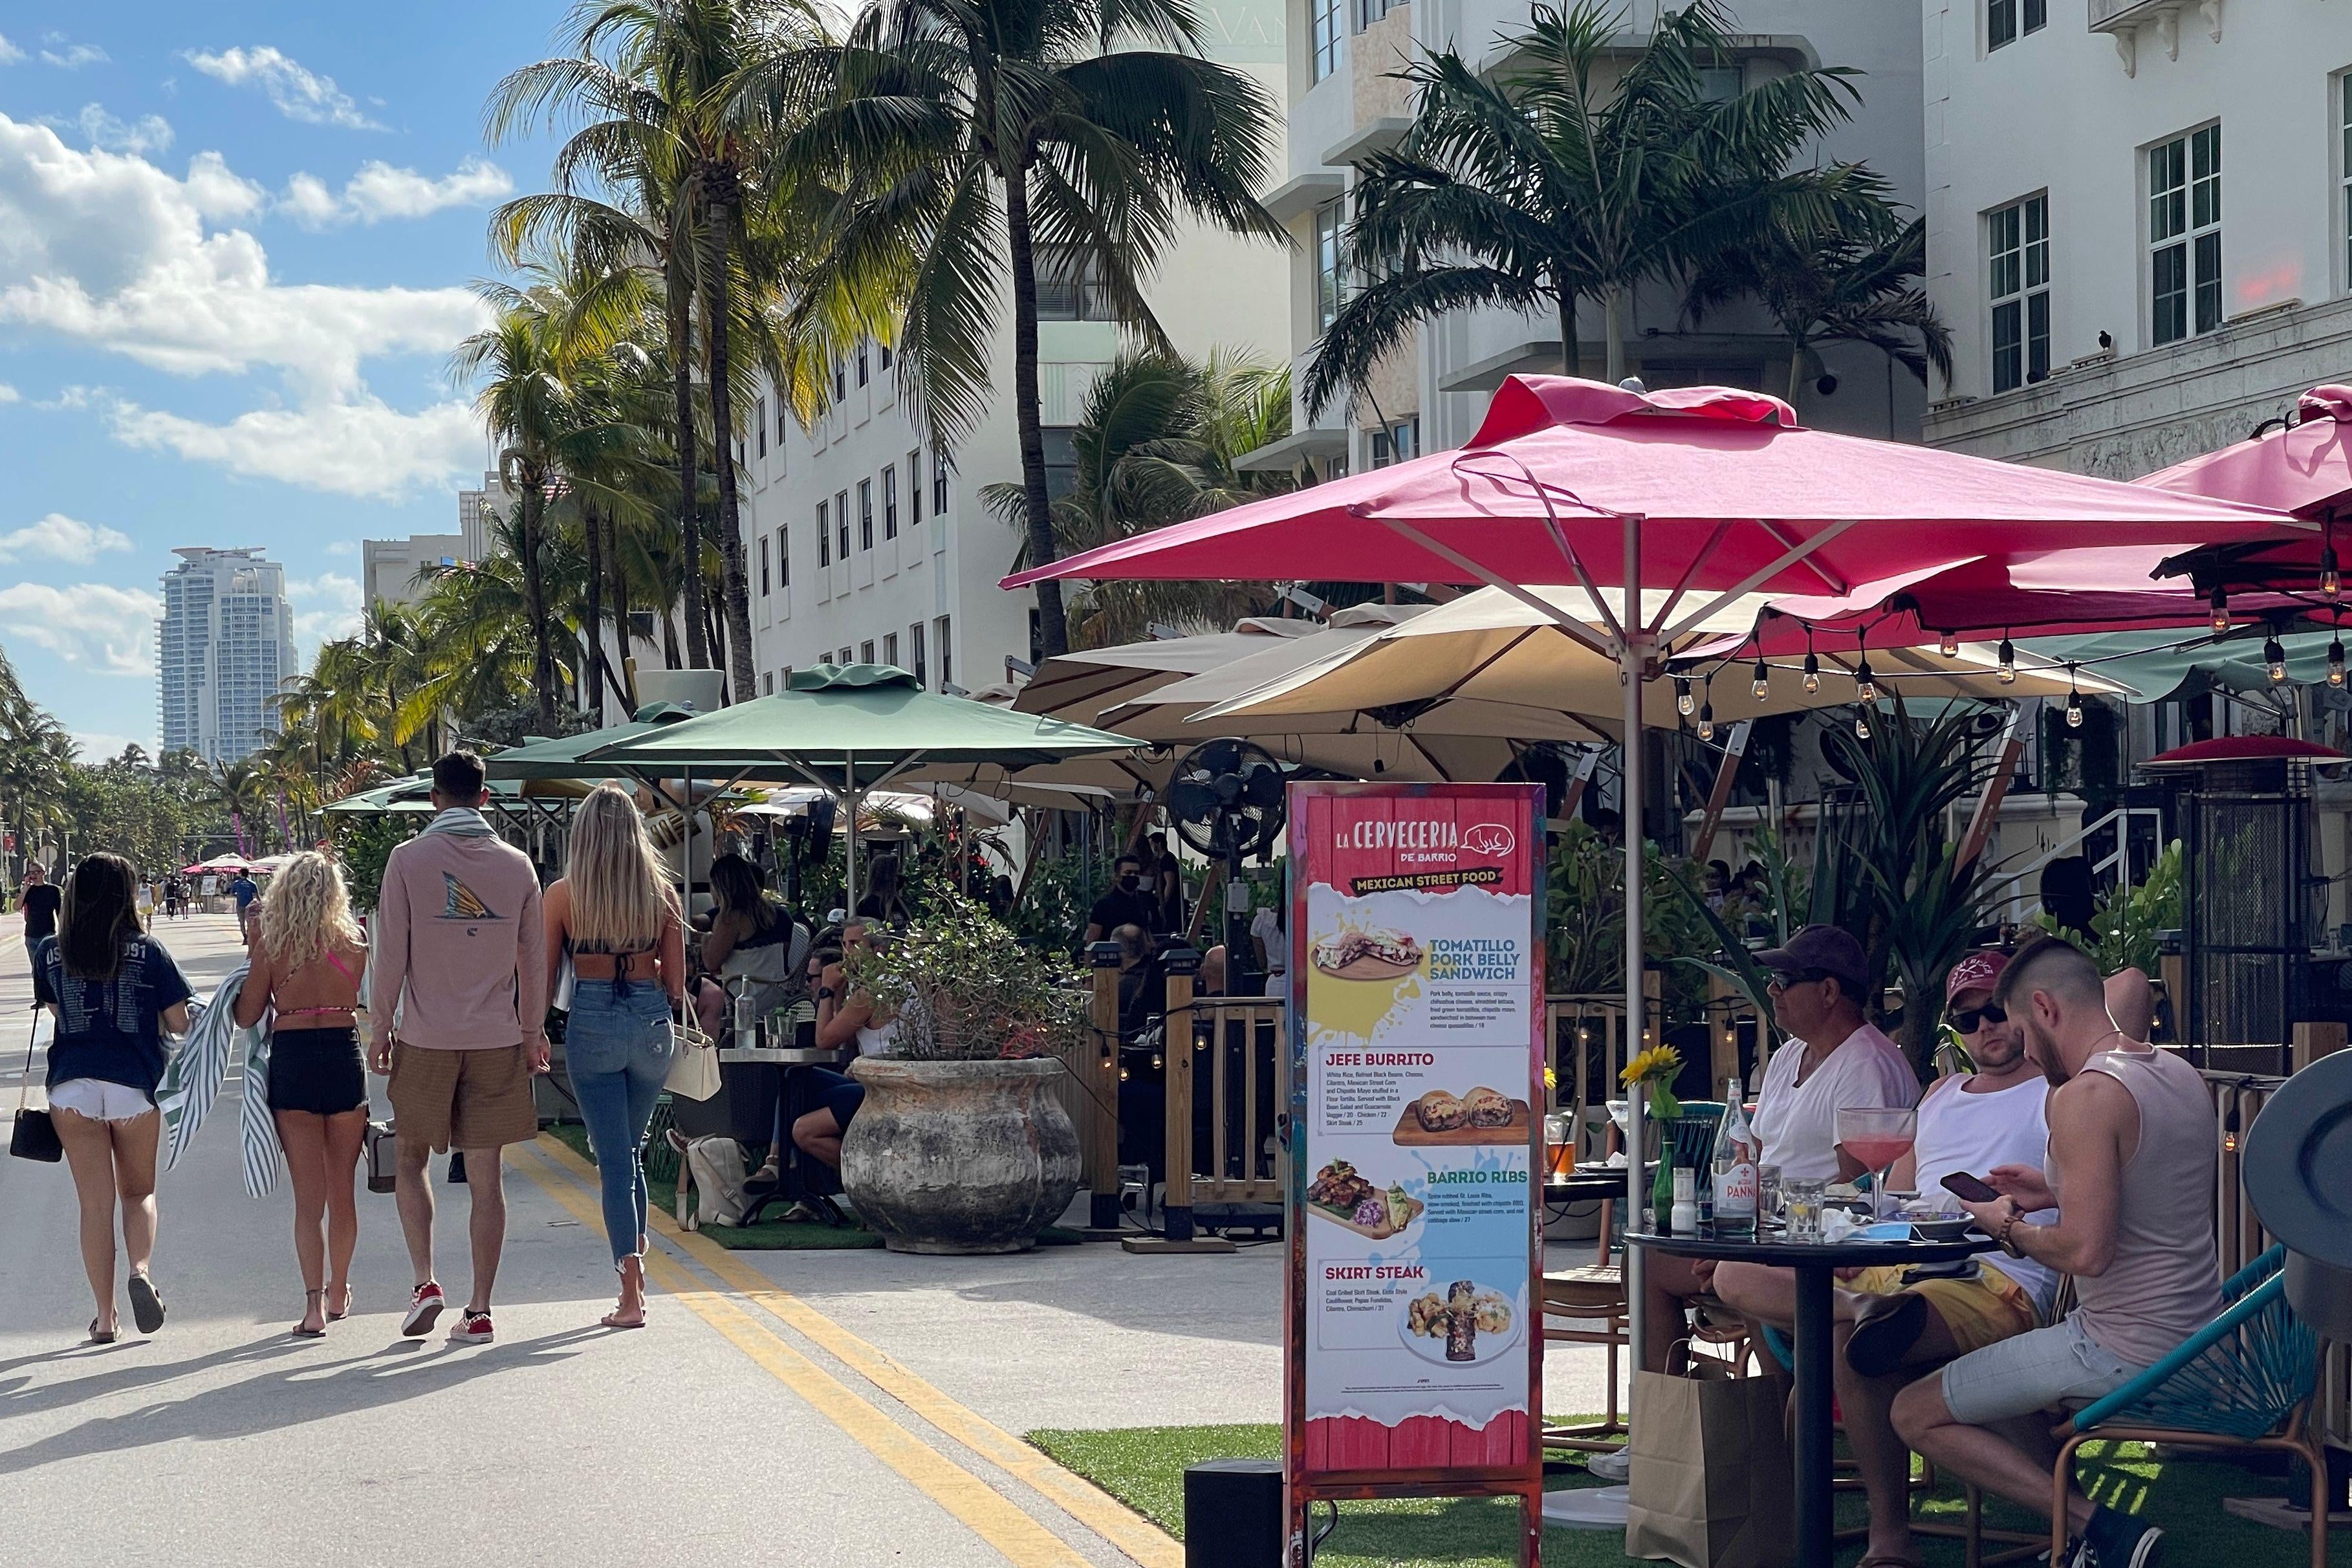 People enjoy food sitting on the outdoor area of Ocean Drive restaurants  in South beach, Florida.